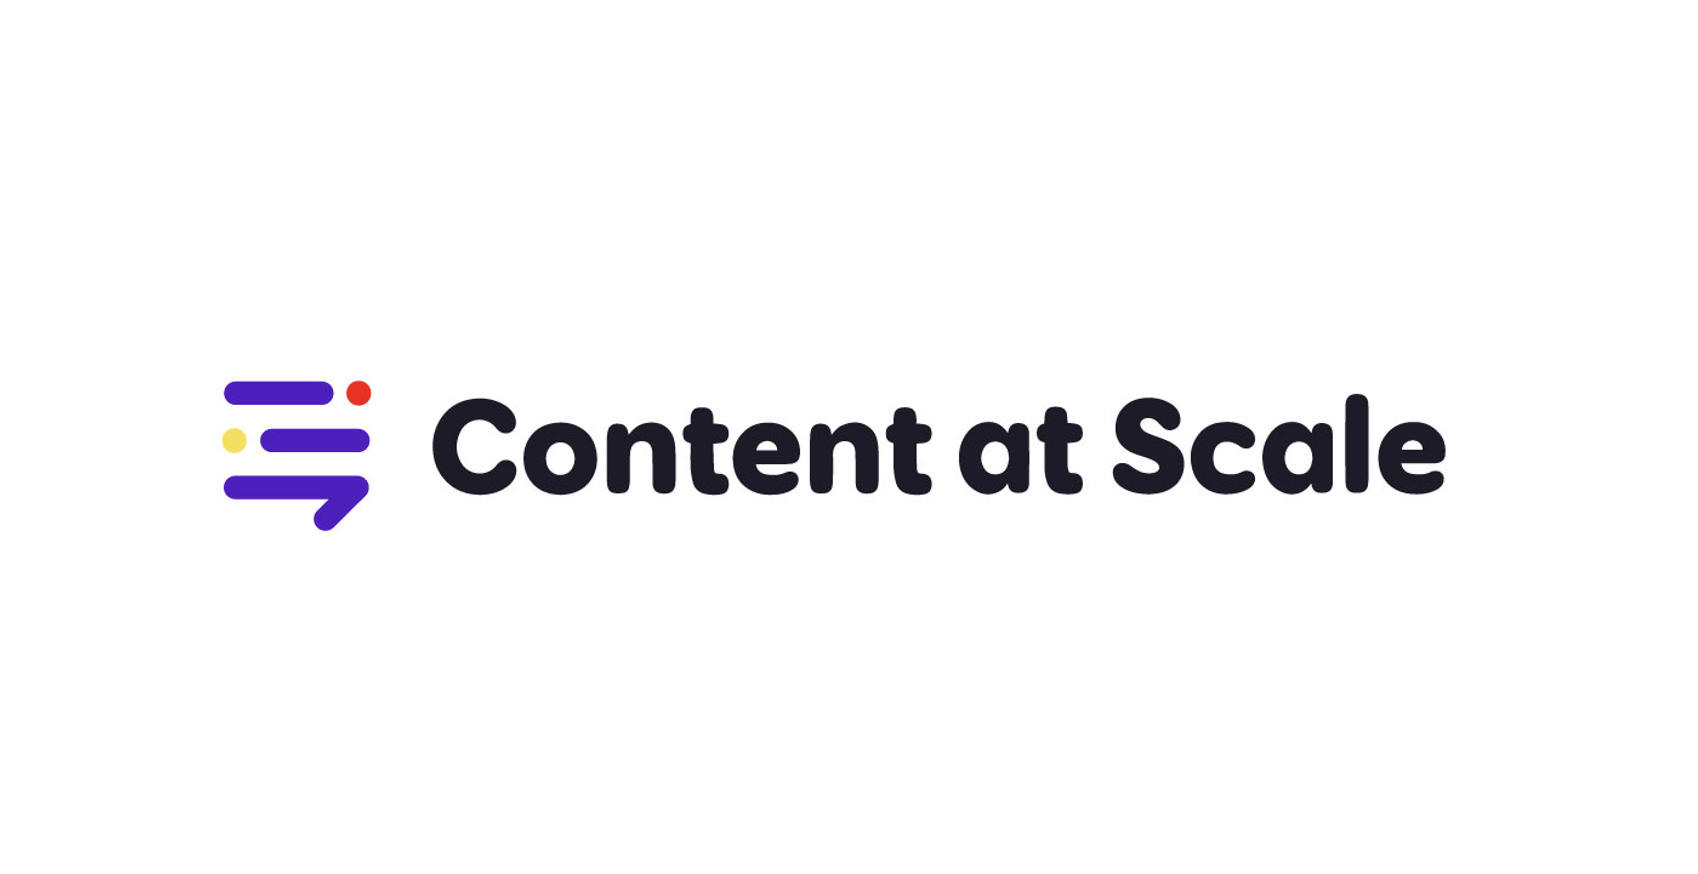 Content At Scale - A content automation platform and generate SEO-optimized articles